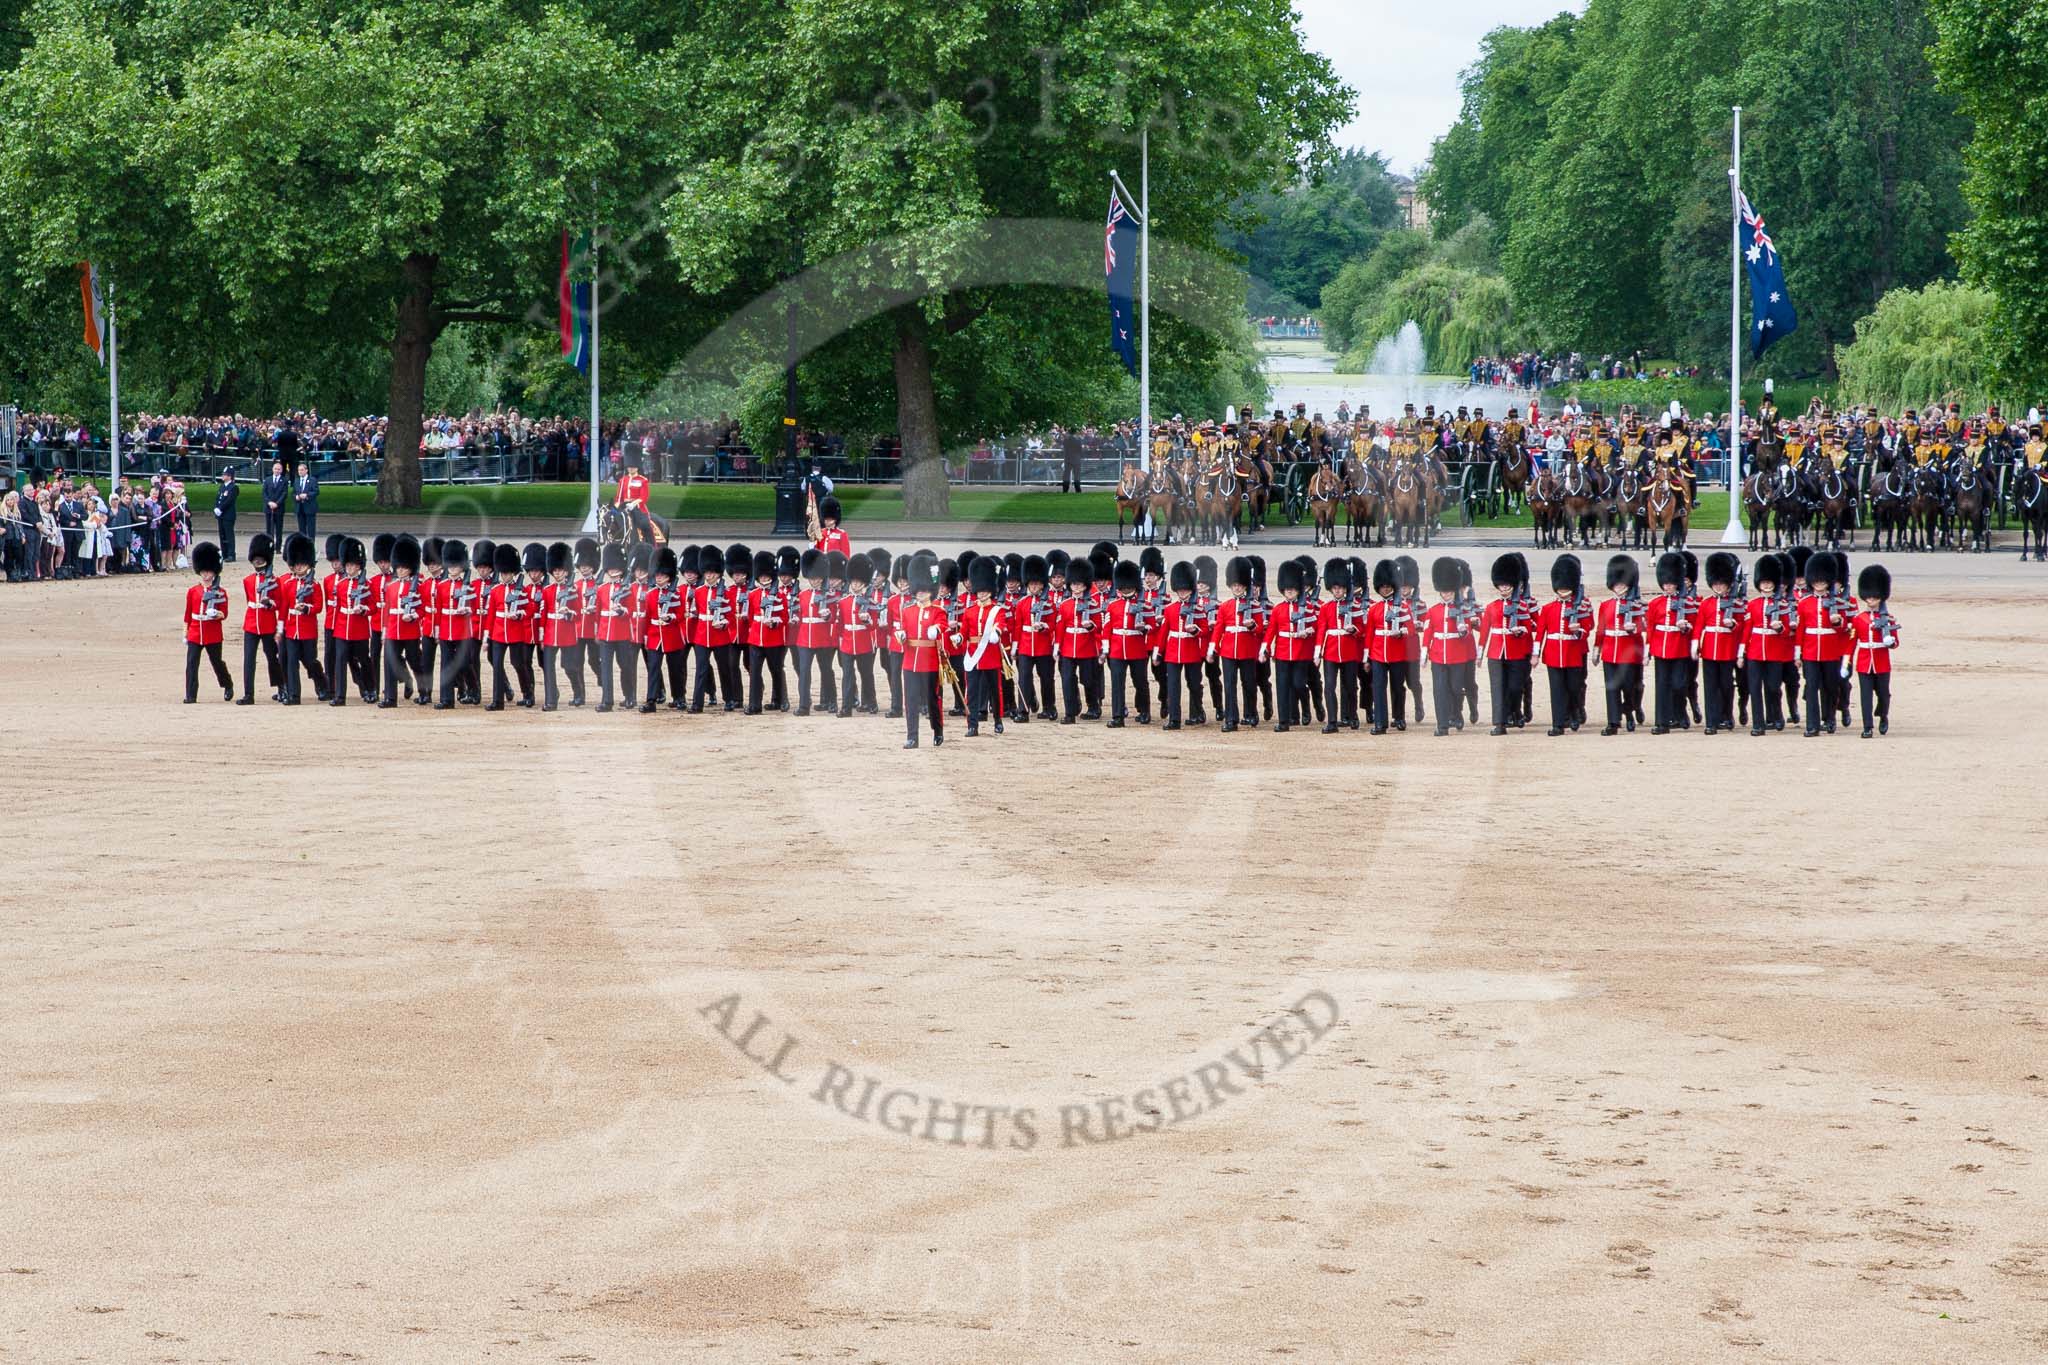 Trooping the Colour 2013: No. 1 Guard (Escort for the Colour),1st Battalion Welsh Guards is moving forward to receive the Colour. Image #436, 15 June 2013 11:17 Horse Guards Parade, London, UK